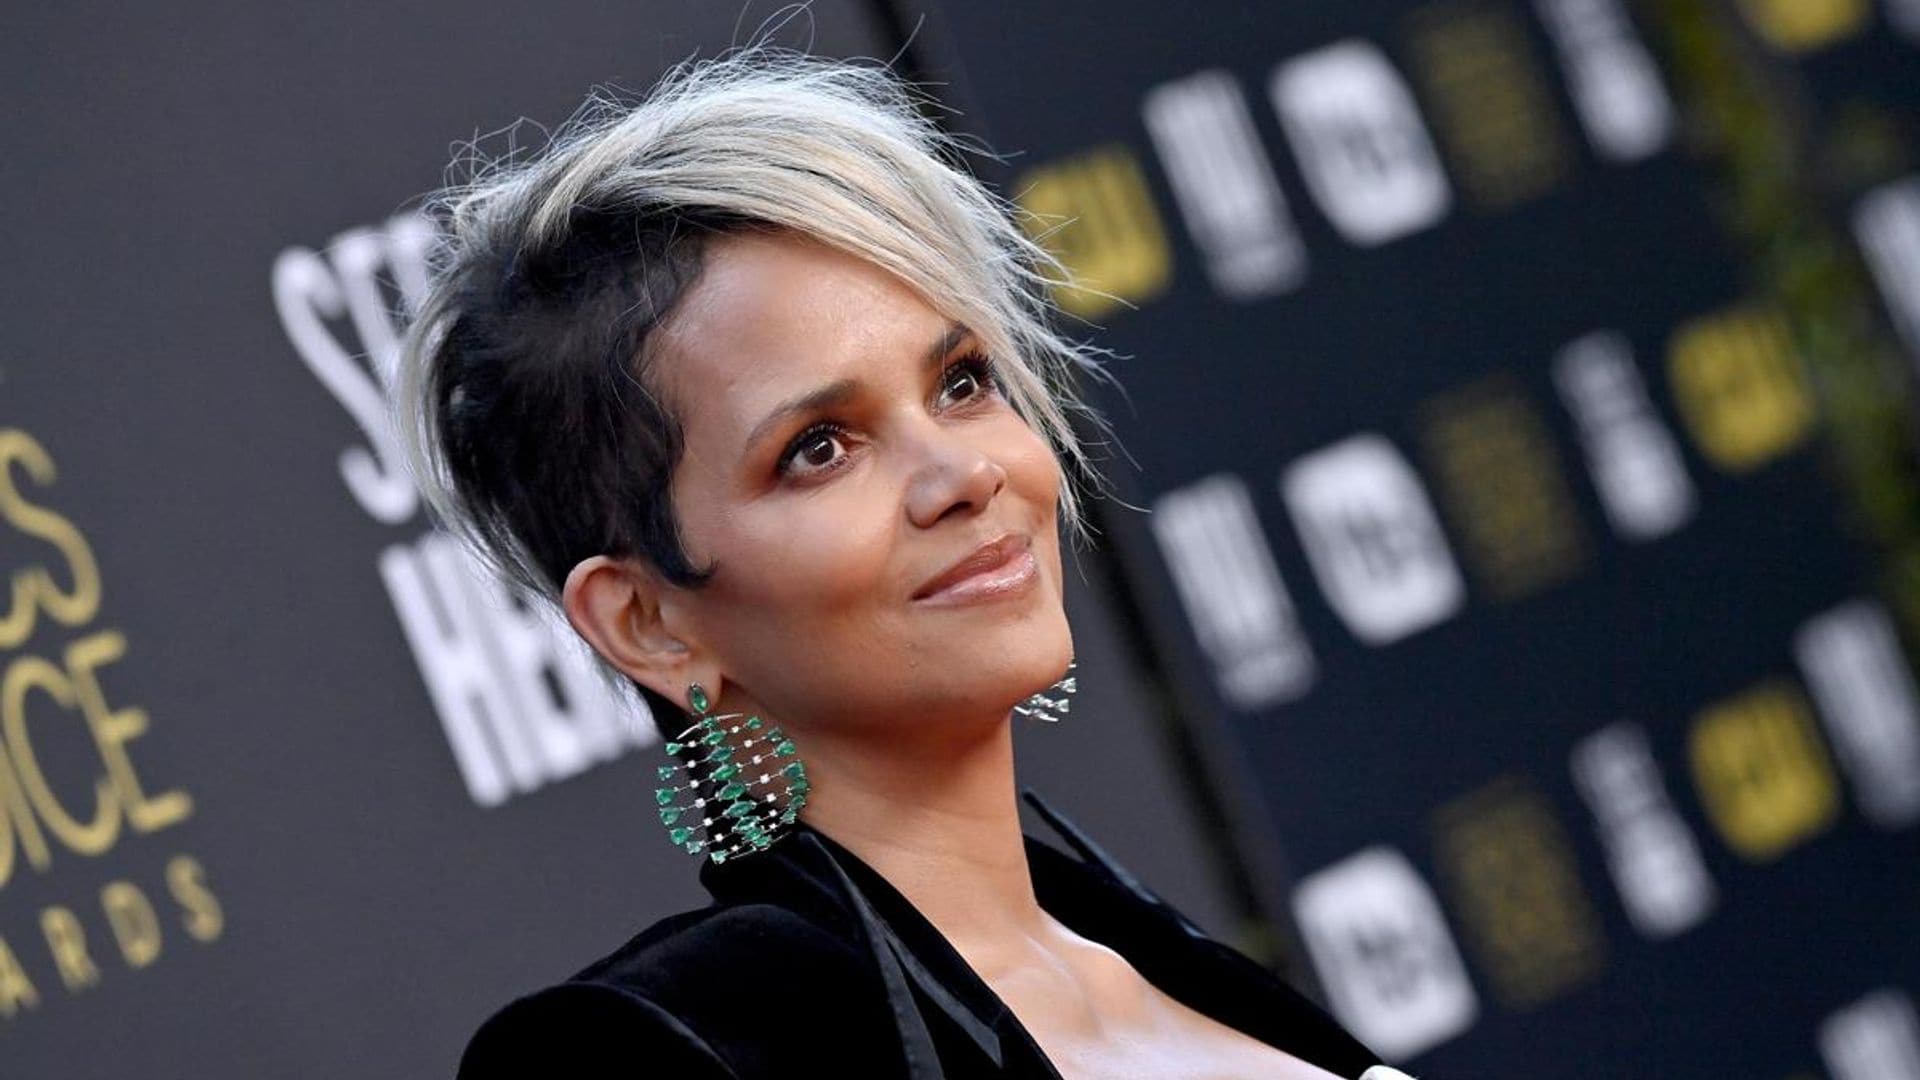 Halle Berry celebrates her daughter's 14th birthday with the sweetest snapshot and message